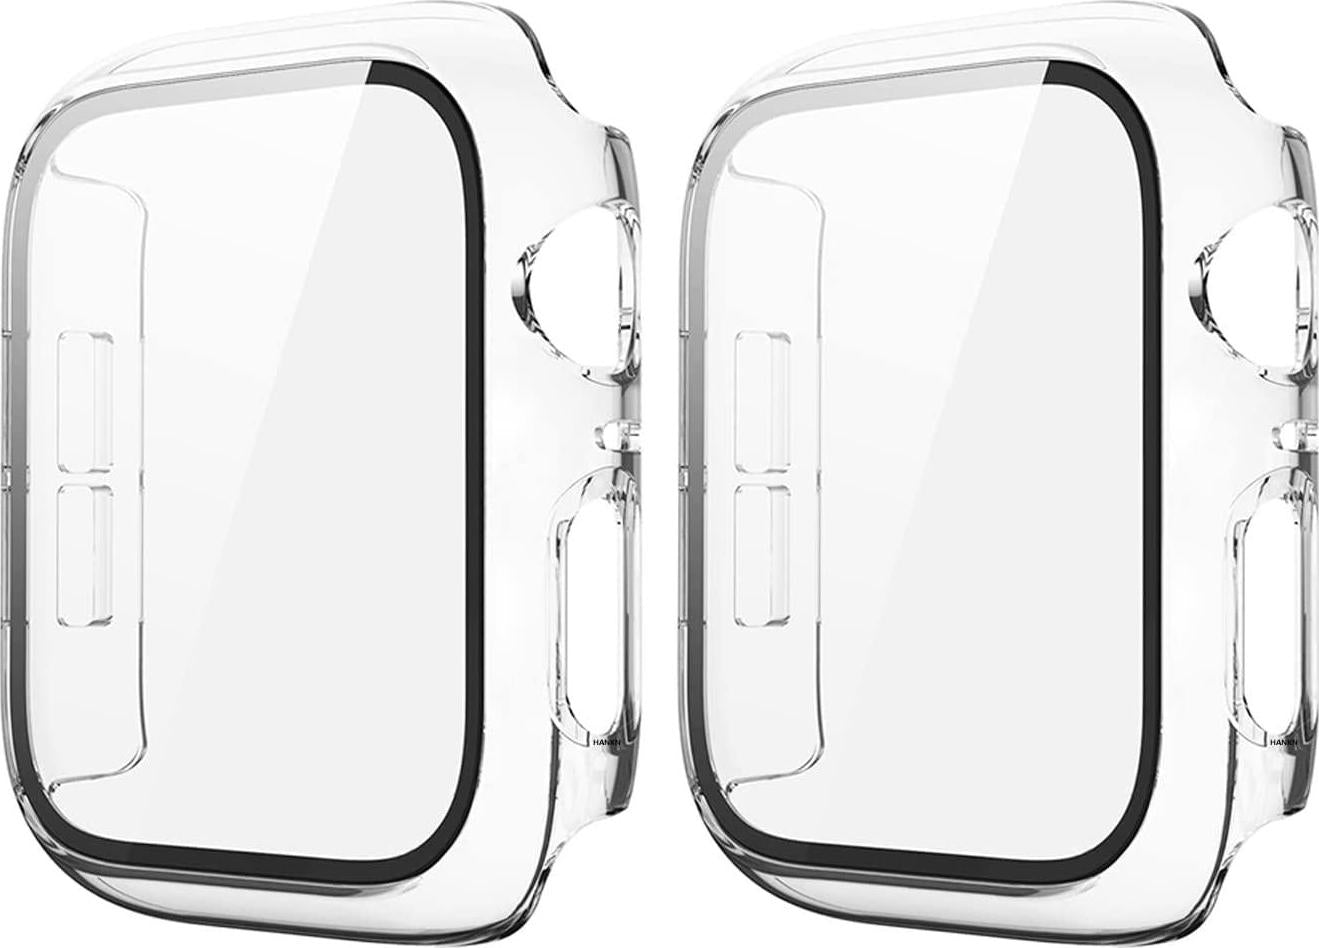 HANKN, HANKN 2 Pack Clear 40mm Case Compatible with Apple Watch Series 6 5 4 SE 40mm Tempered Glass Screen Protector Case, Full Coverage Hard Pc Shockproof Iwatch Cover Bumper (Clear+Clear, 40mm)